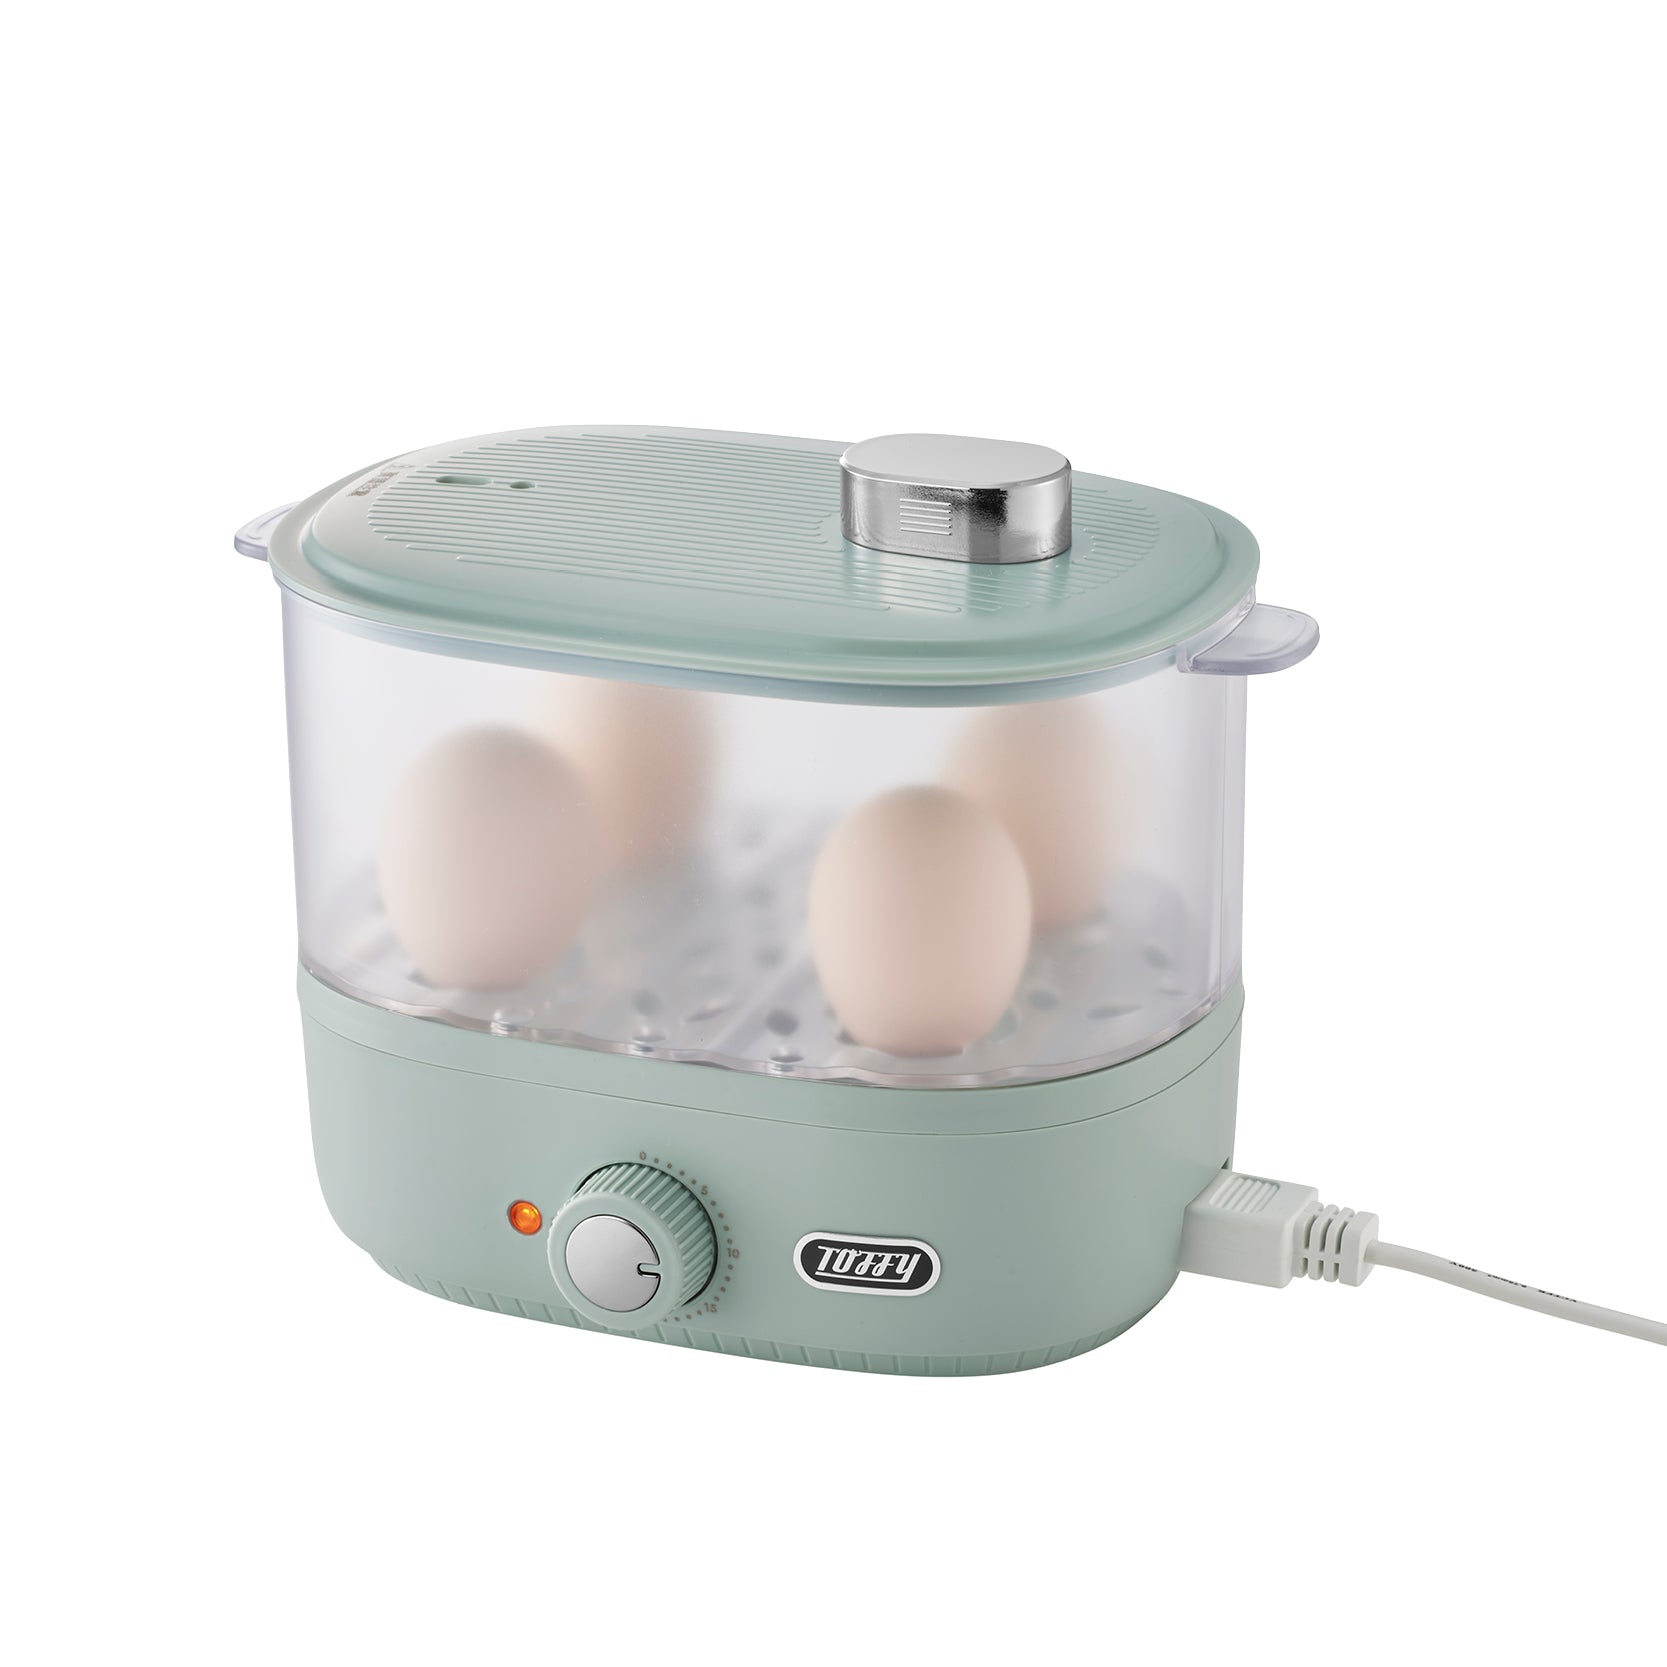 Toffy Compact Food Steamer 電蒸鍋 K-FS1-PA